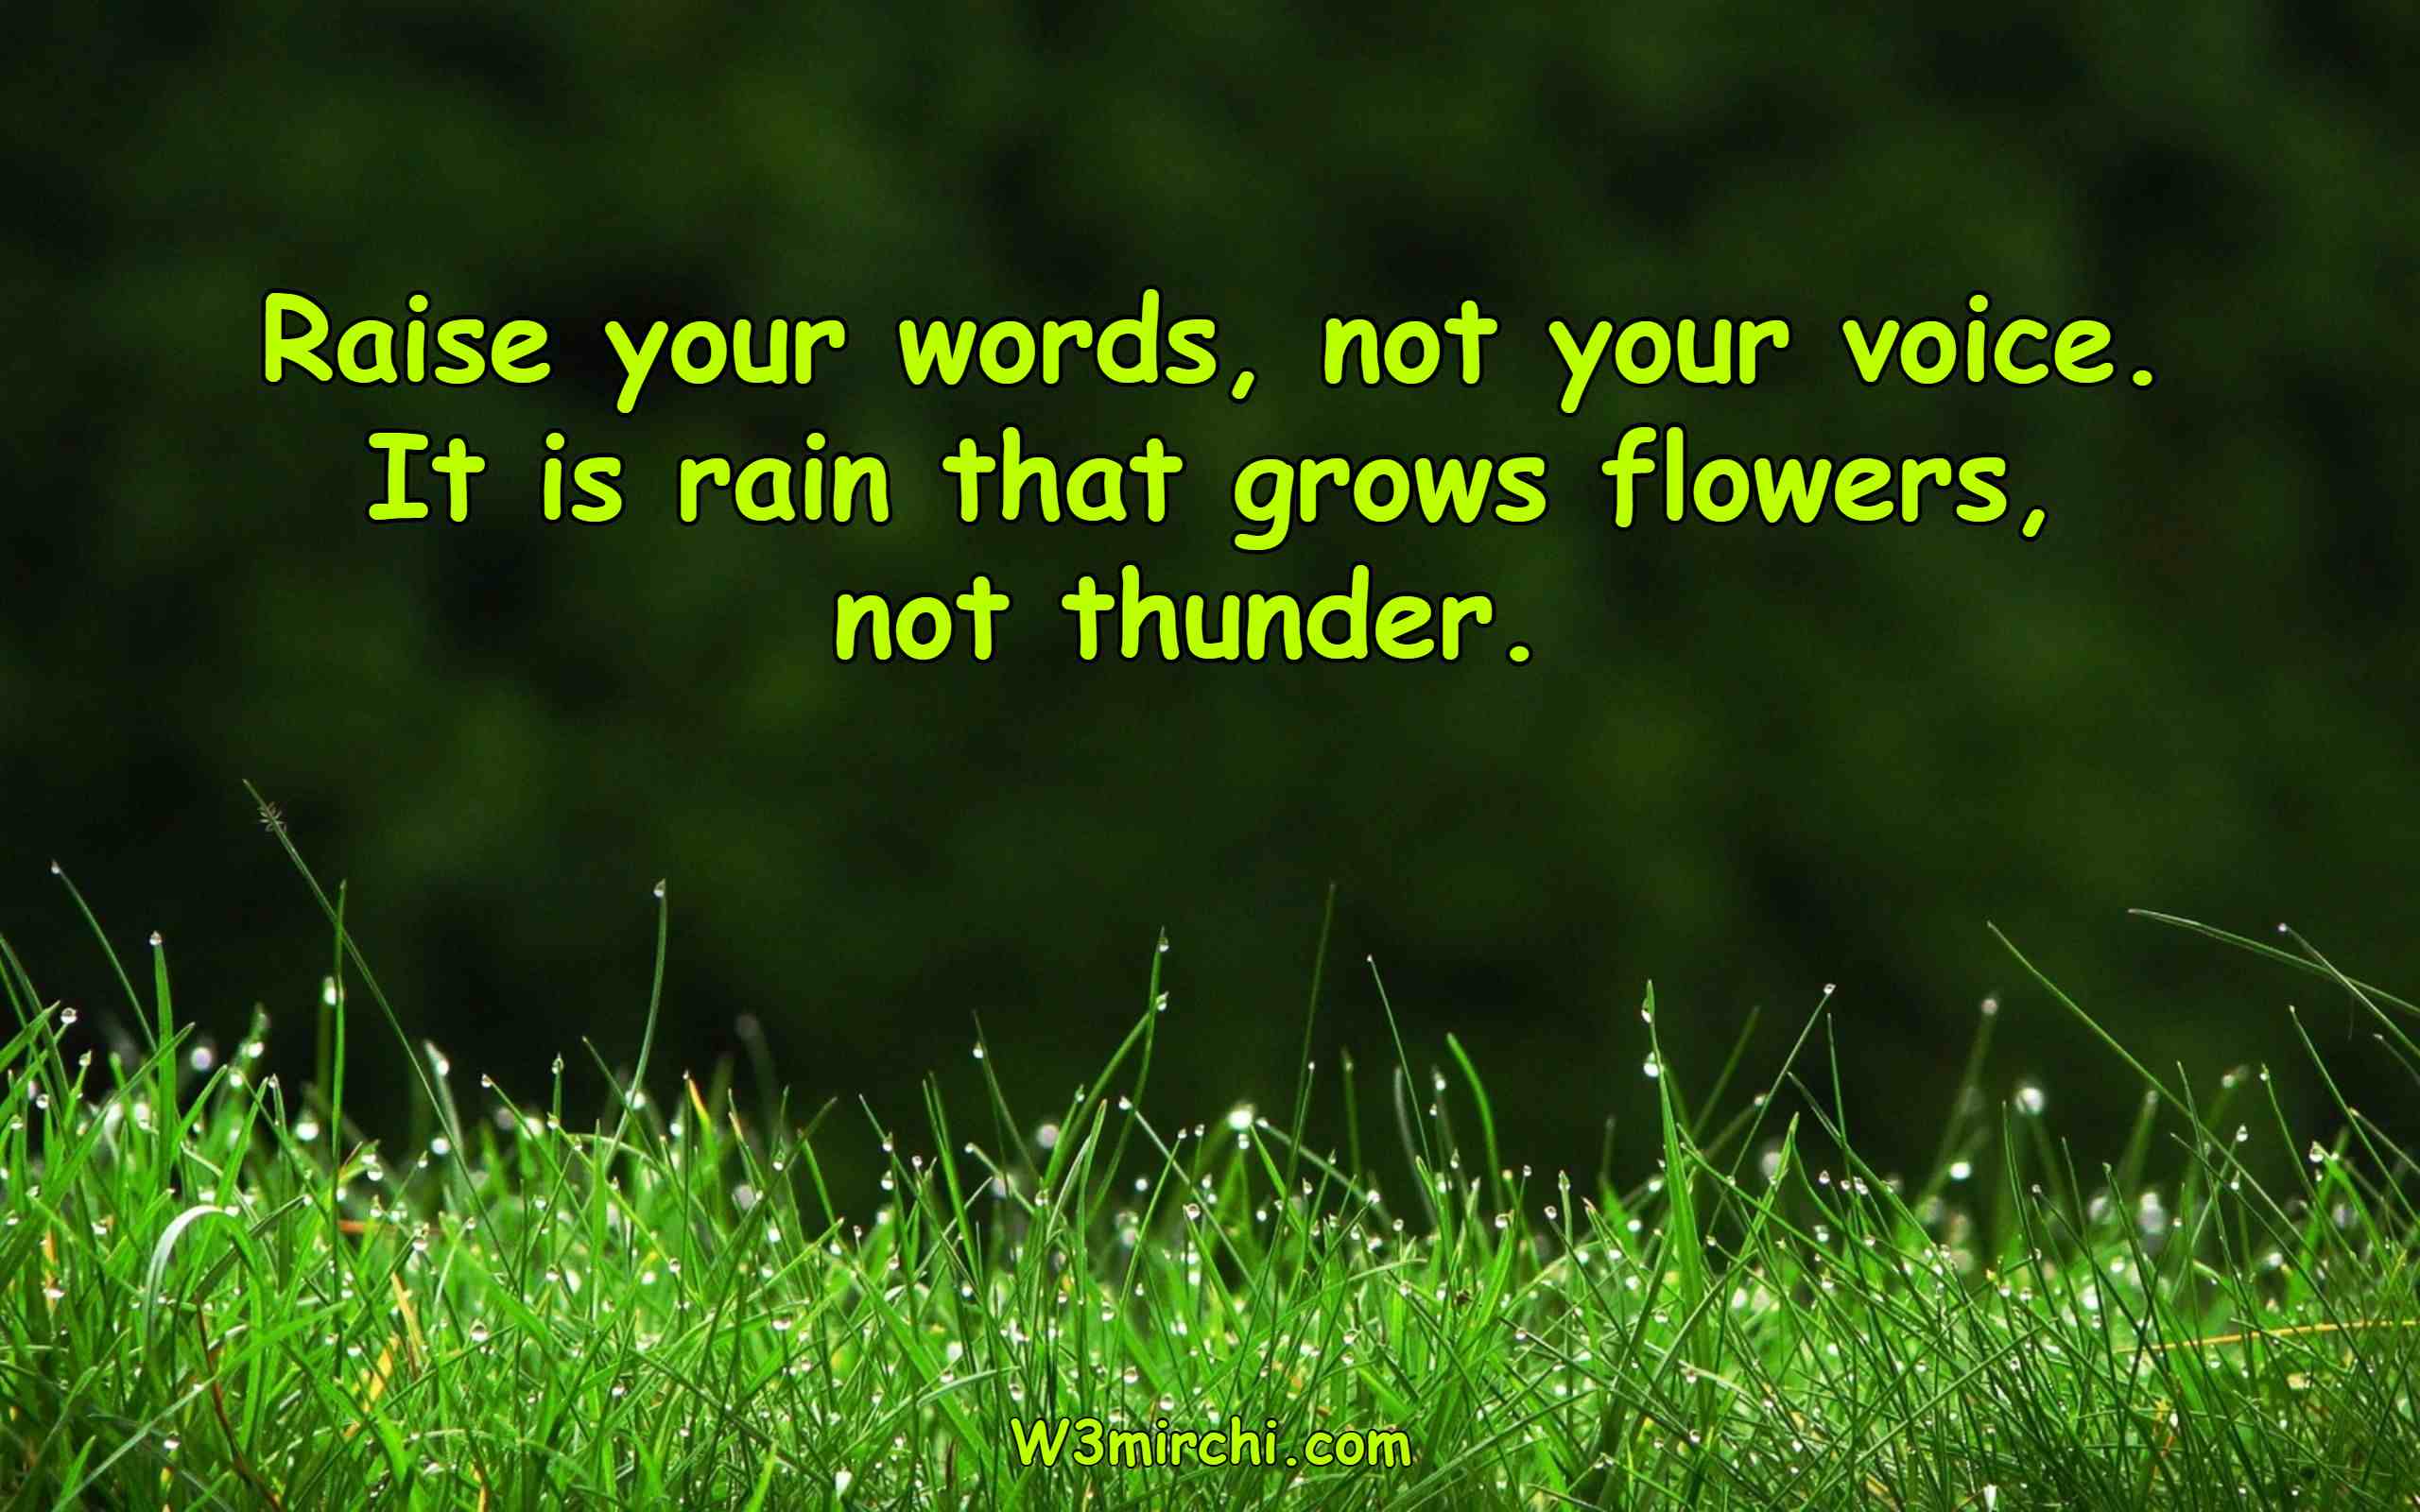 Raise your words, not your voice.